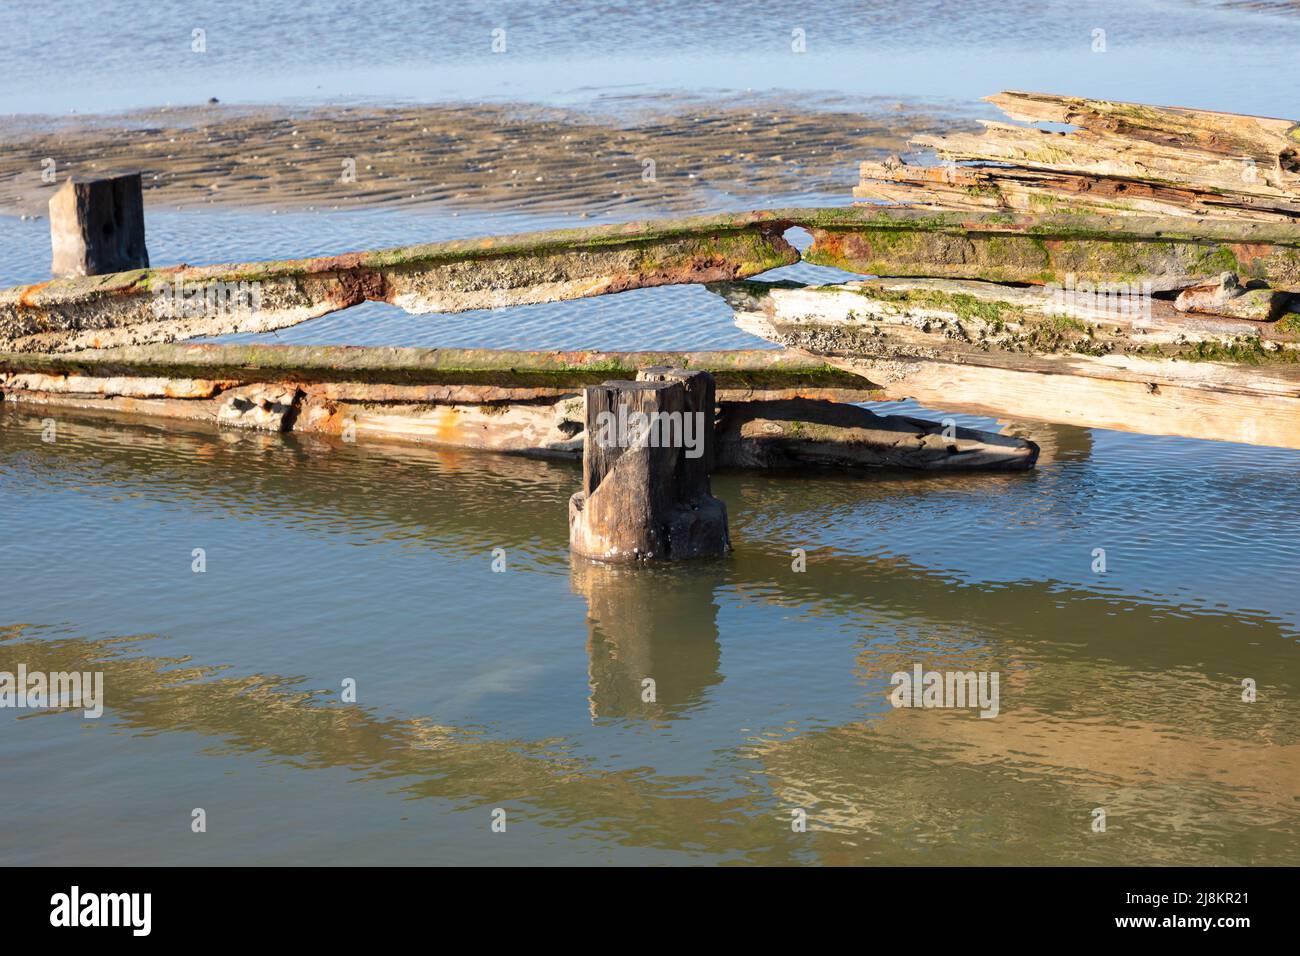 Remains of old jetty on the East Frisian island of Spiekeroog, Germany Stock Photo